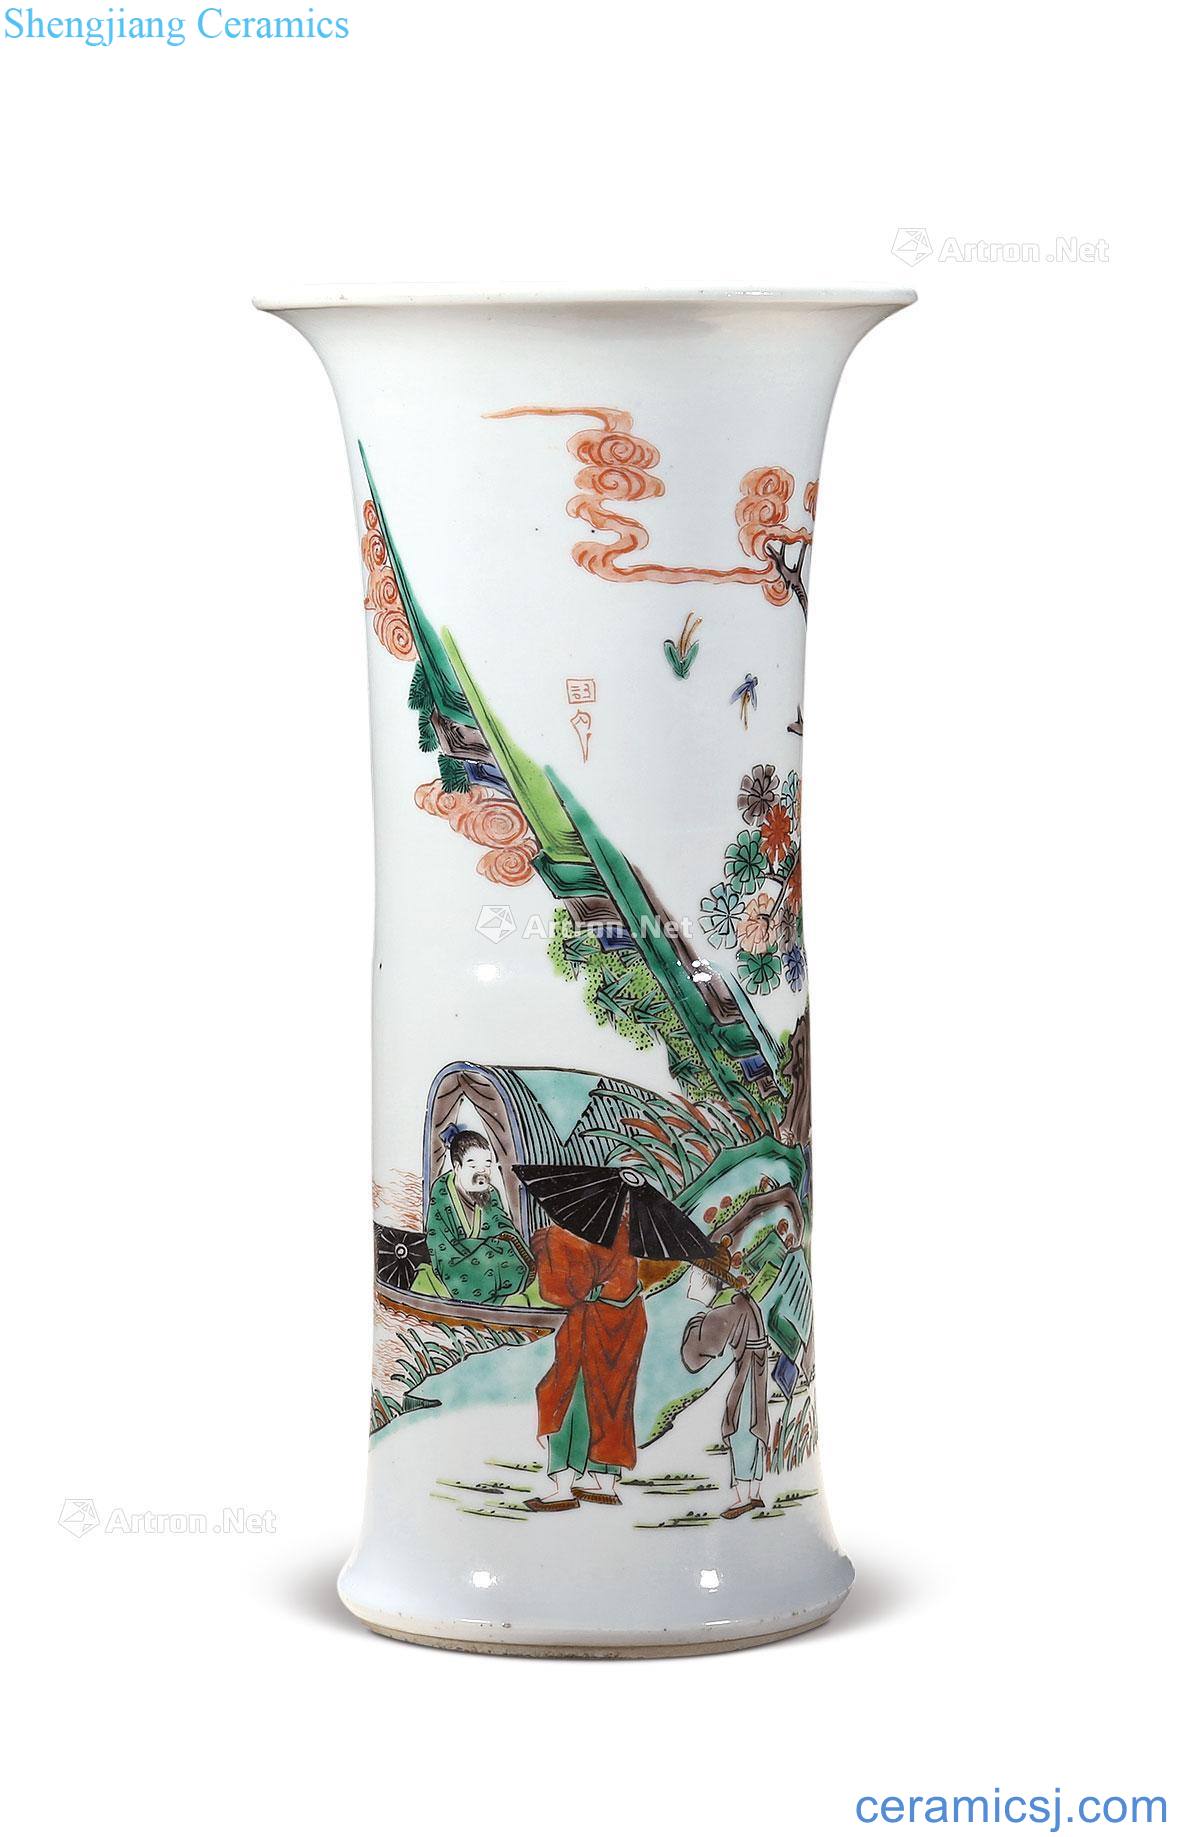 Qing guangxu Flower vase with colorful landscape characters